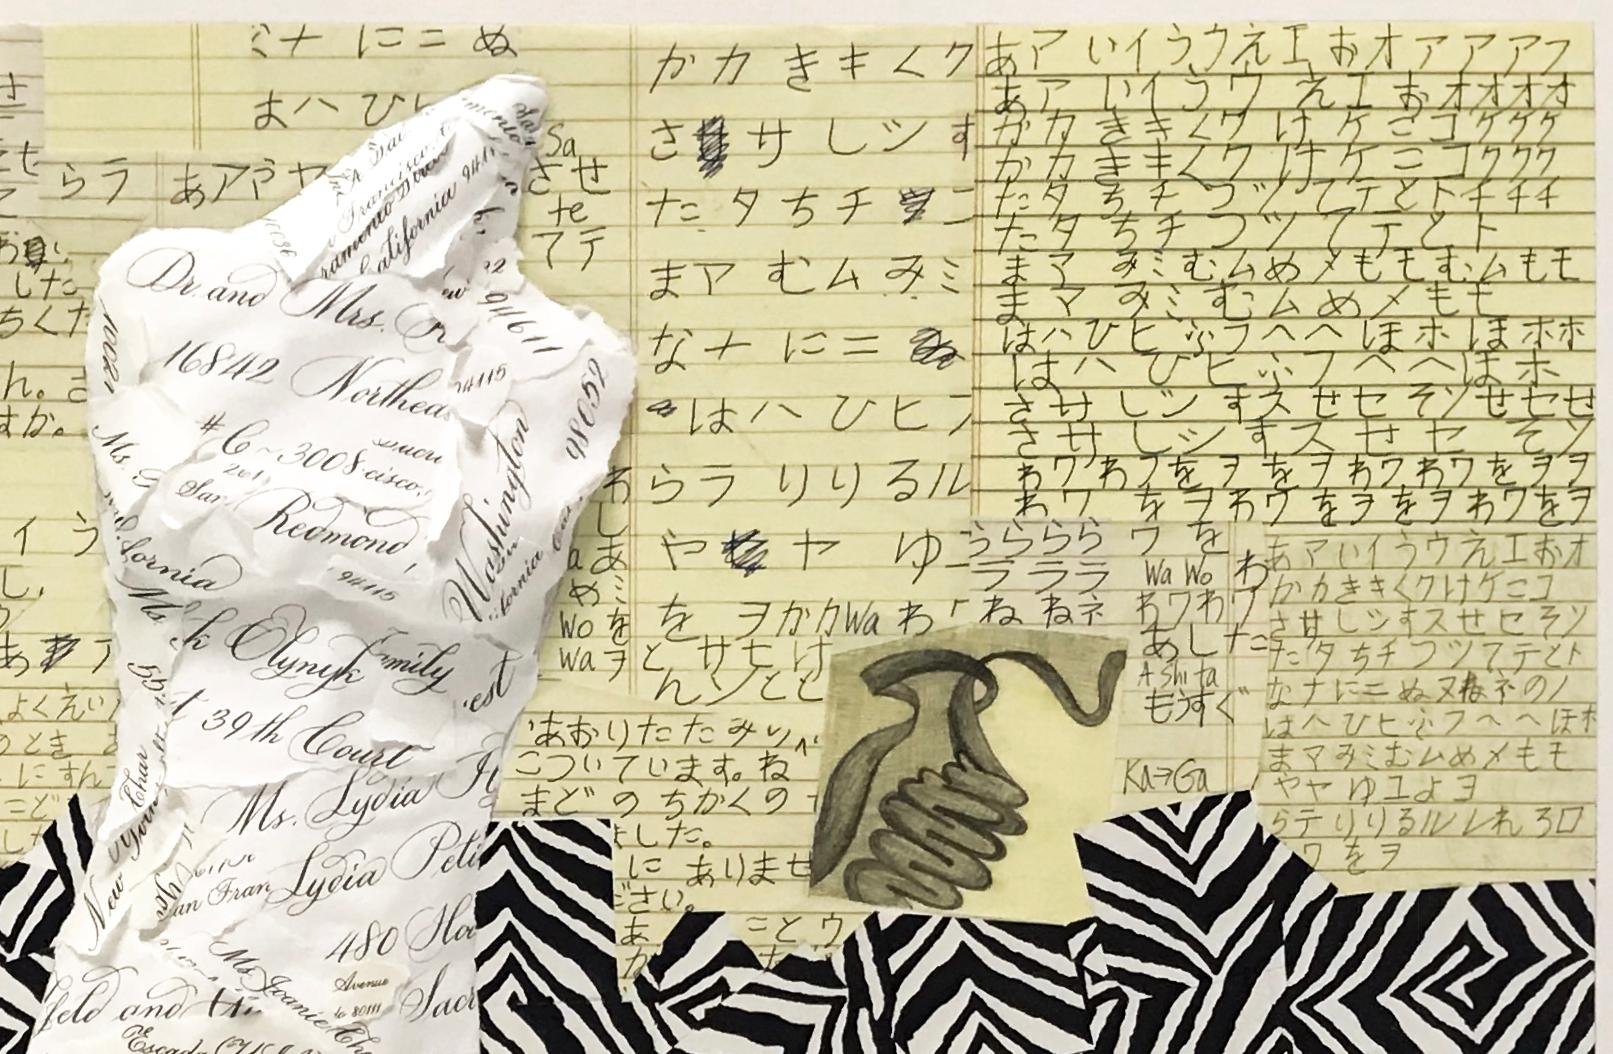 Calligraphy, Doodles and Japanese 977 - 3D Sculptural Drawing Collage - Contemporary Mixed Media Art by Linda Stein